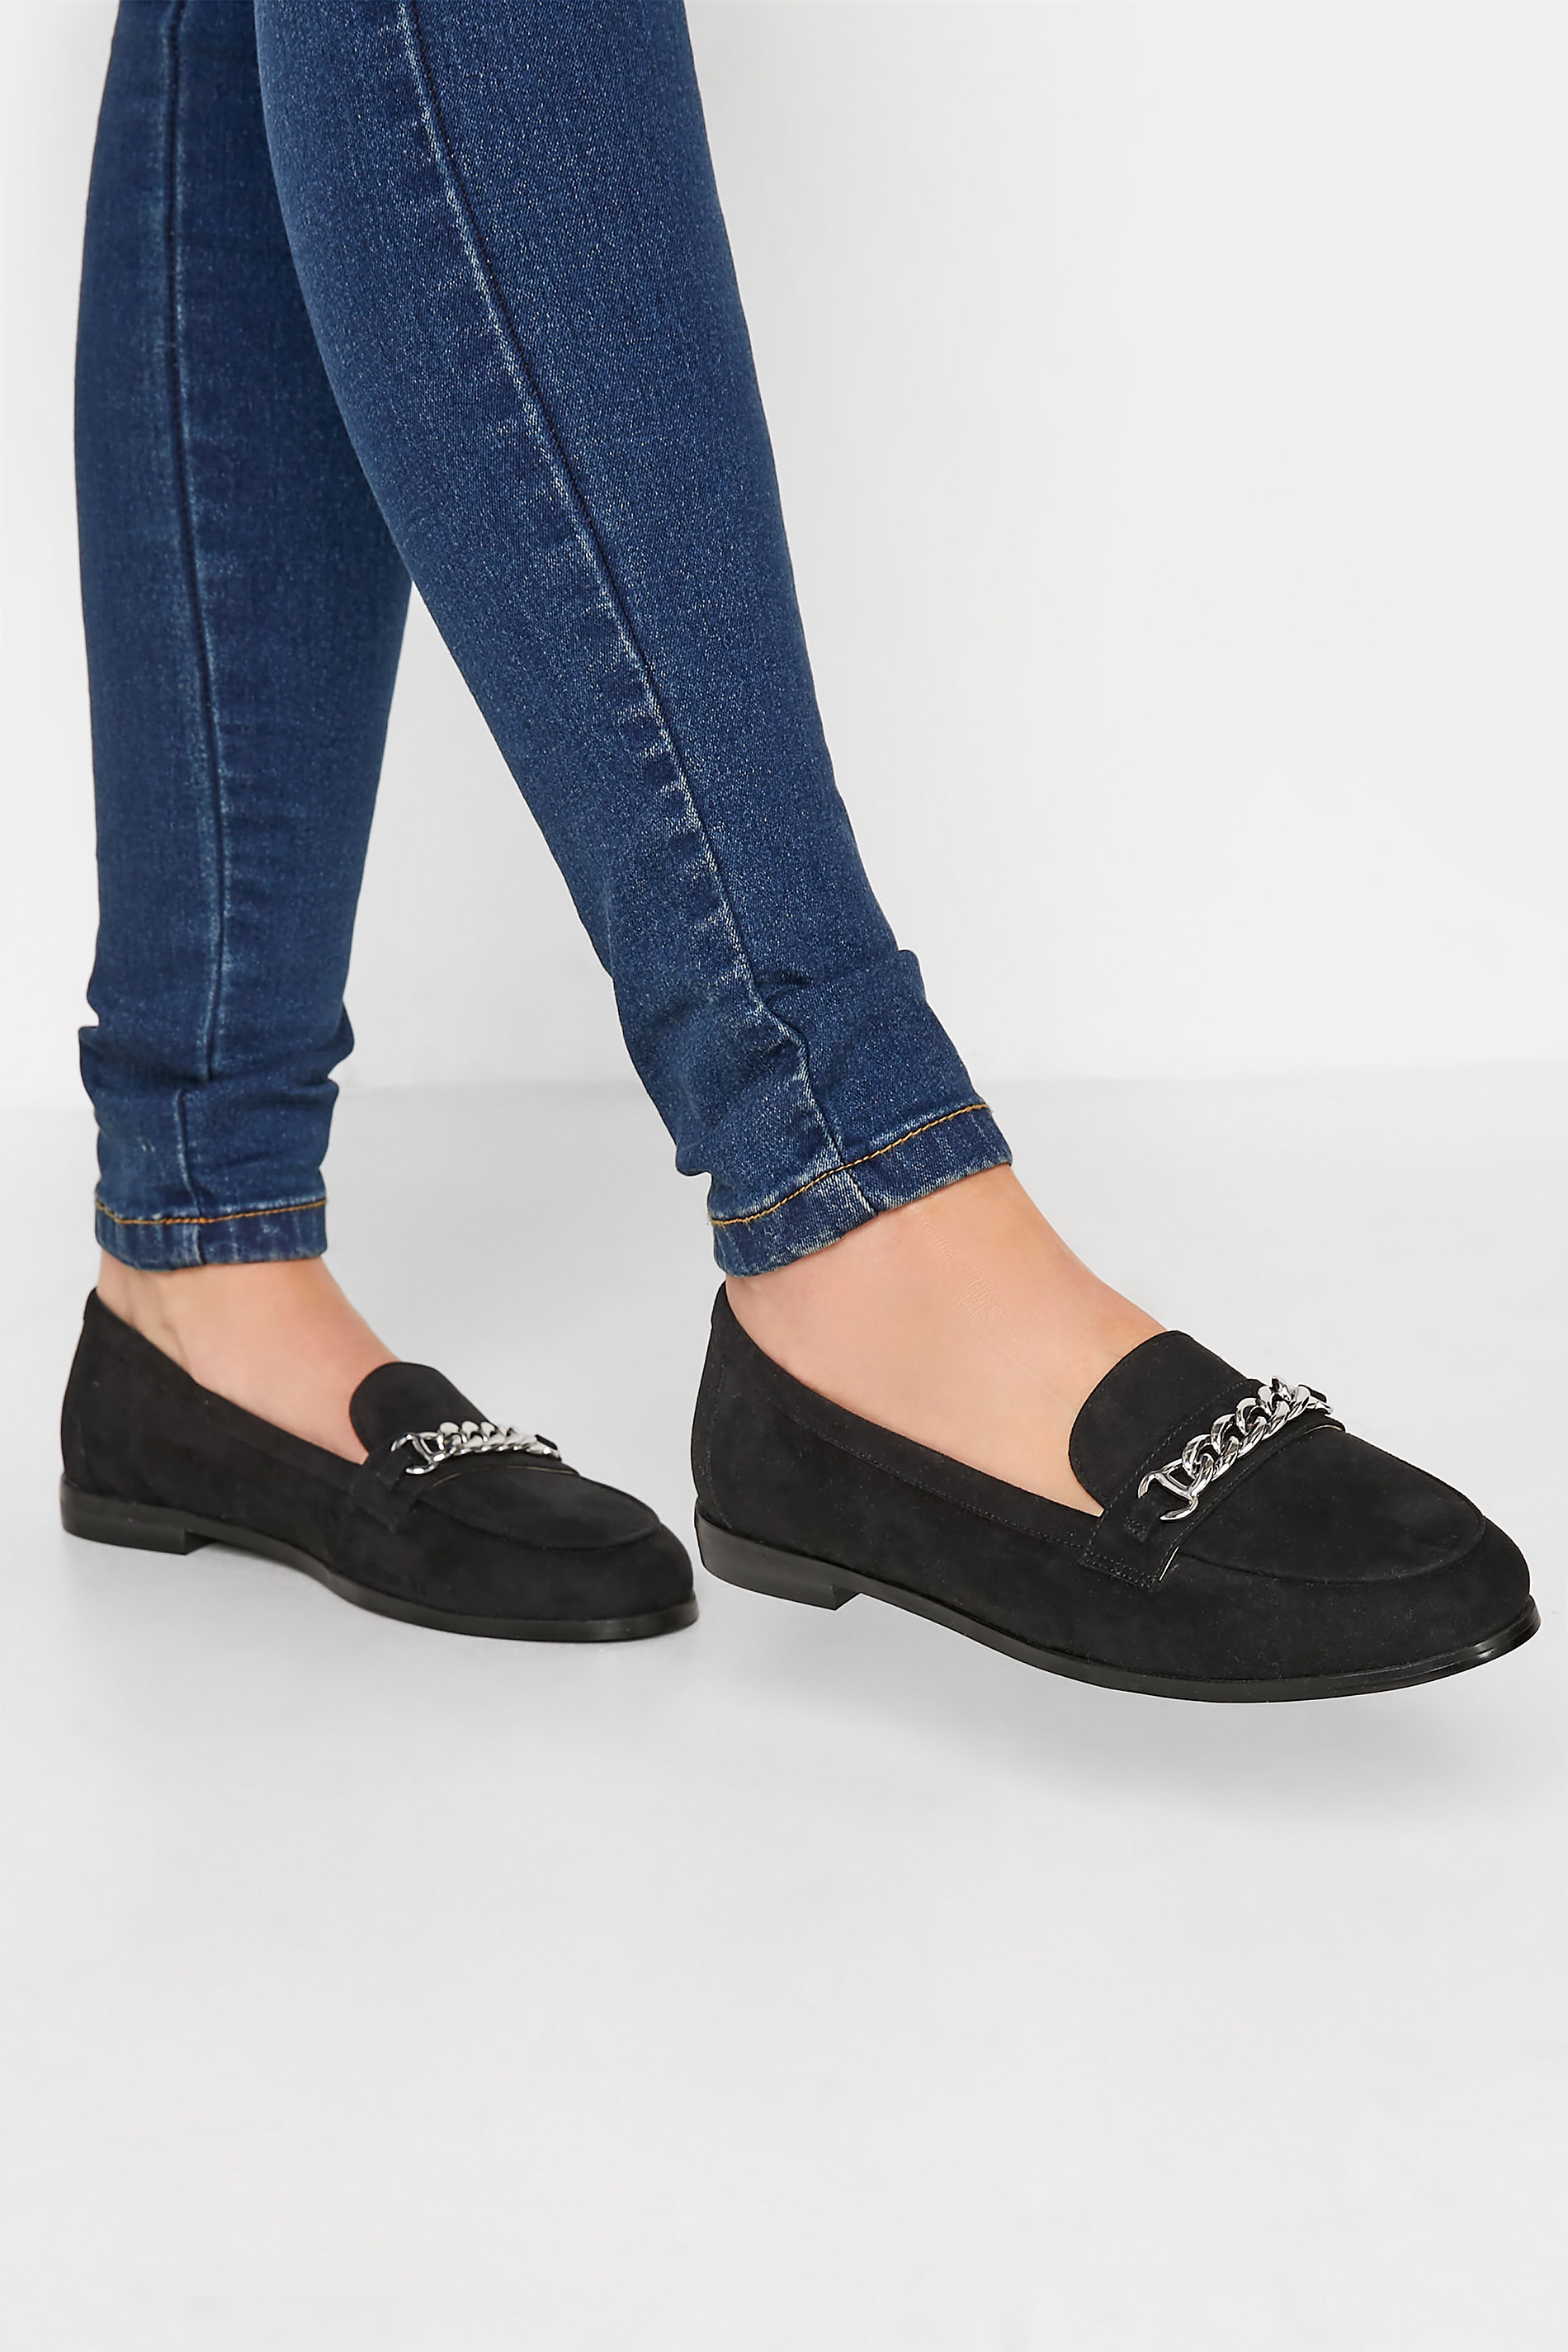 LTS Black Chain Loafers In Standard Fit | Long Tall Sally 1